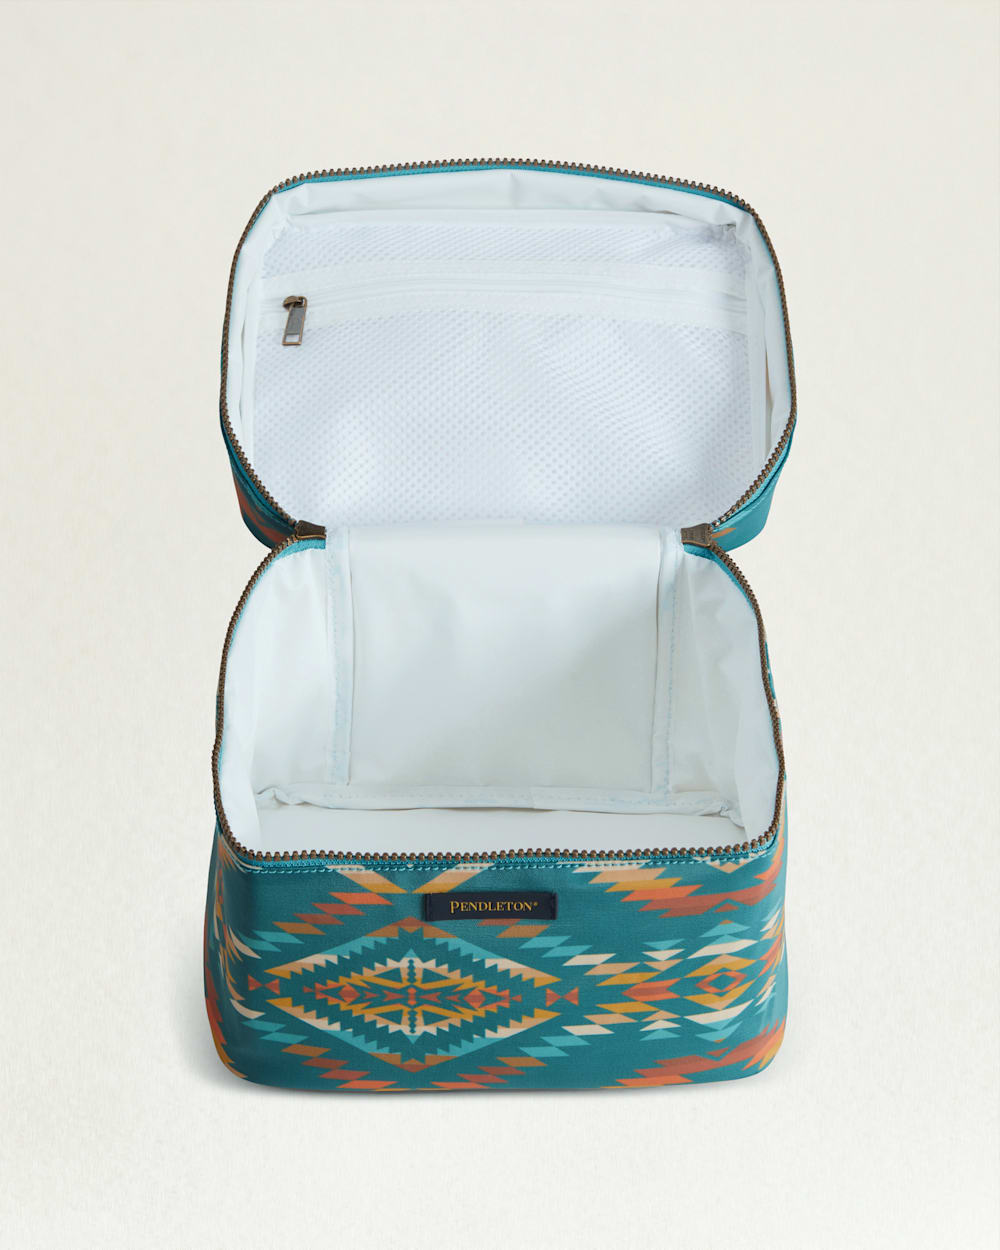 ALTERNATE VIEW OF SUMMERLAND BRIGHT CANOPY CANVAS SOFT COOLER IN TURQUOISE image number 3